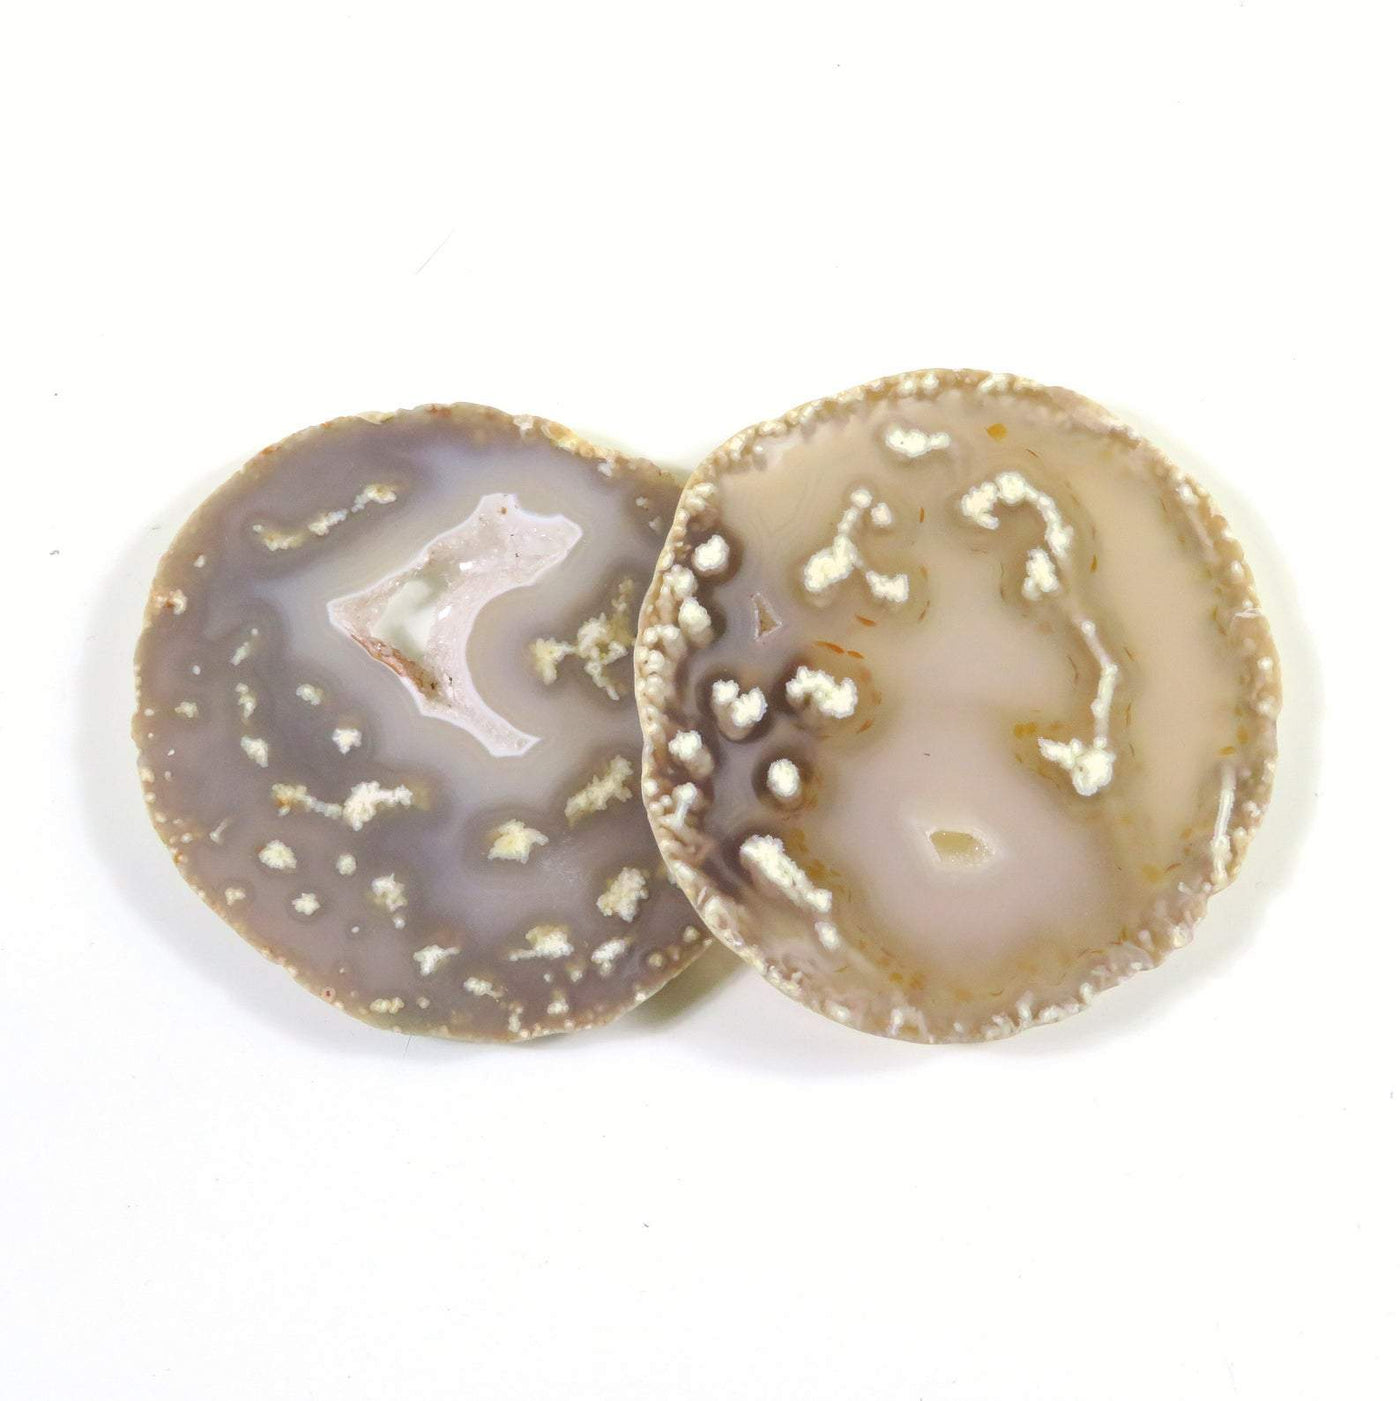 Natural Druzy Agate Slices - 2 pc set - next to each other